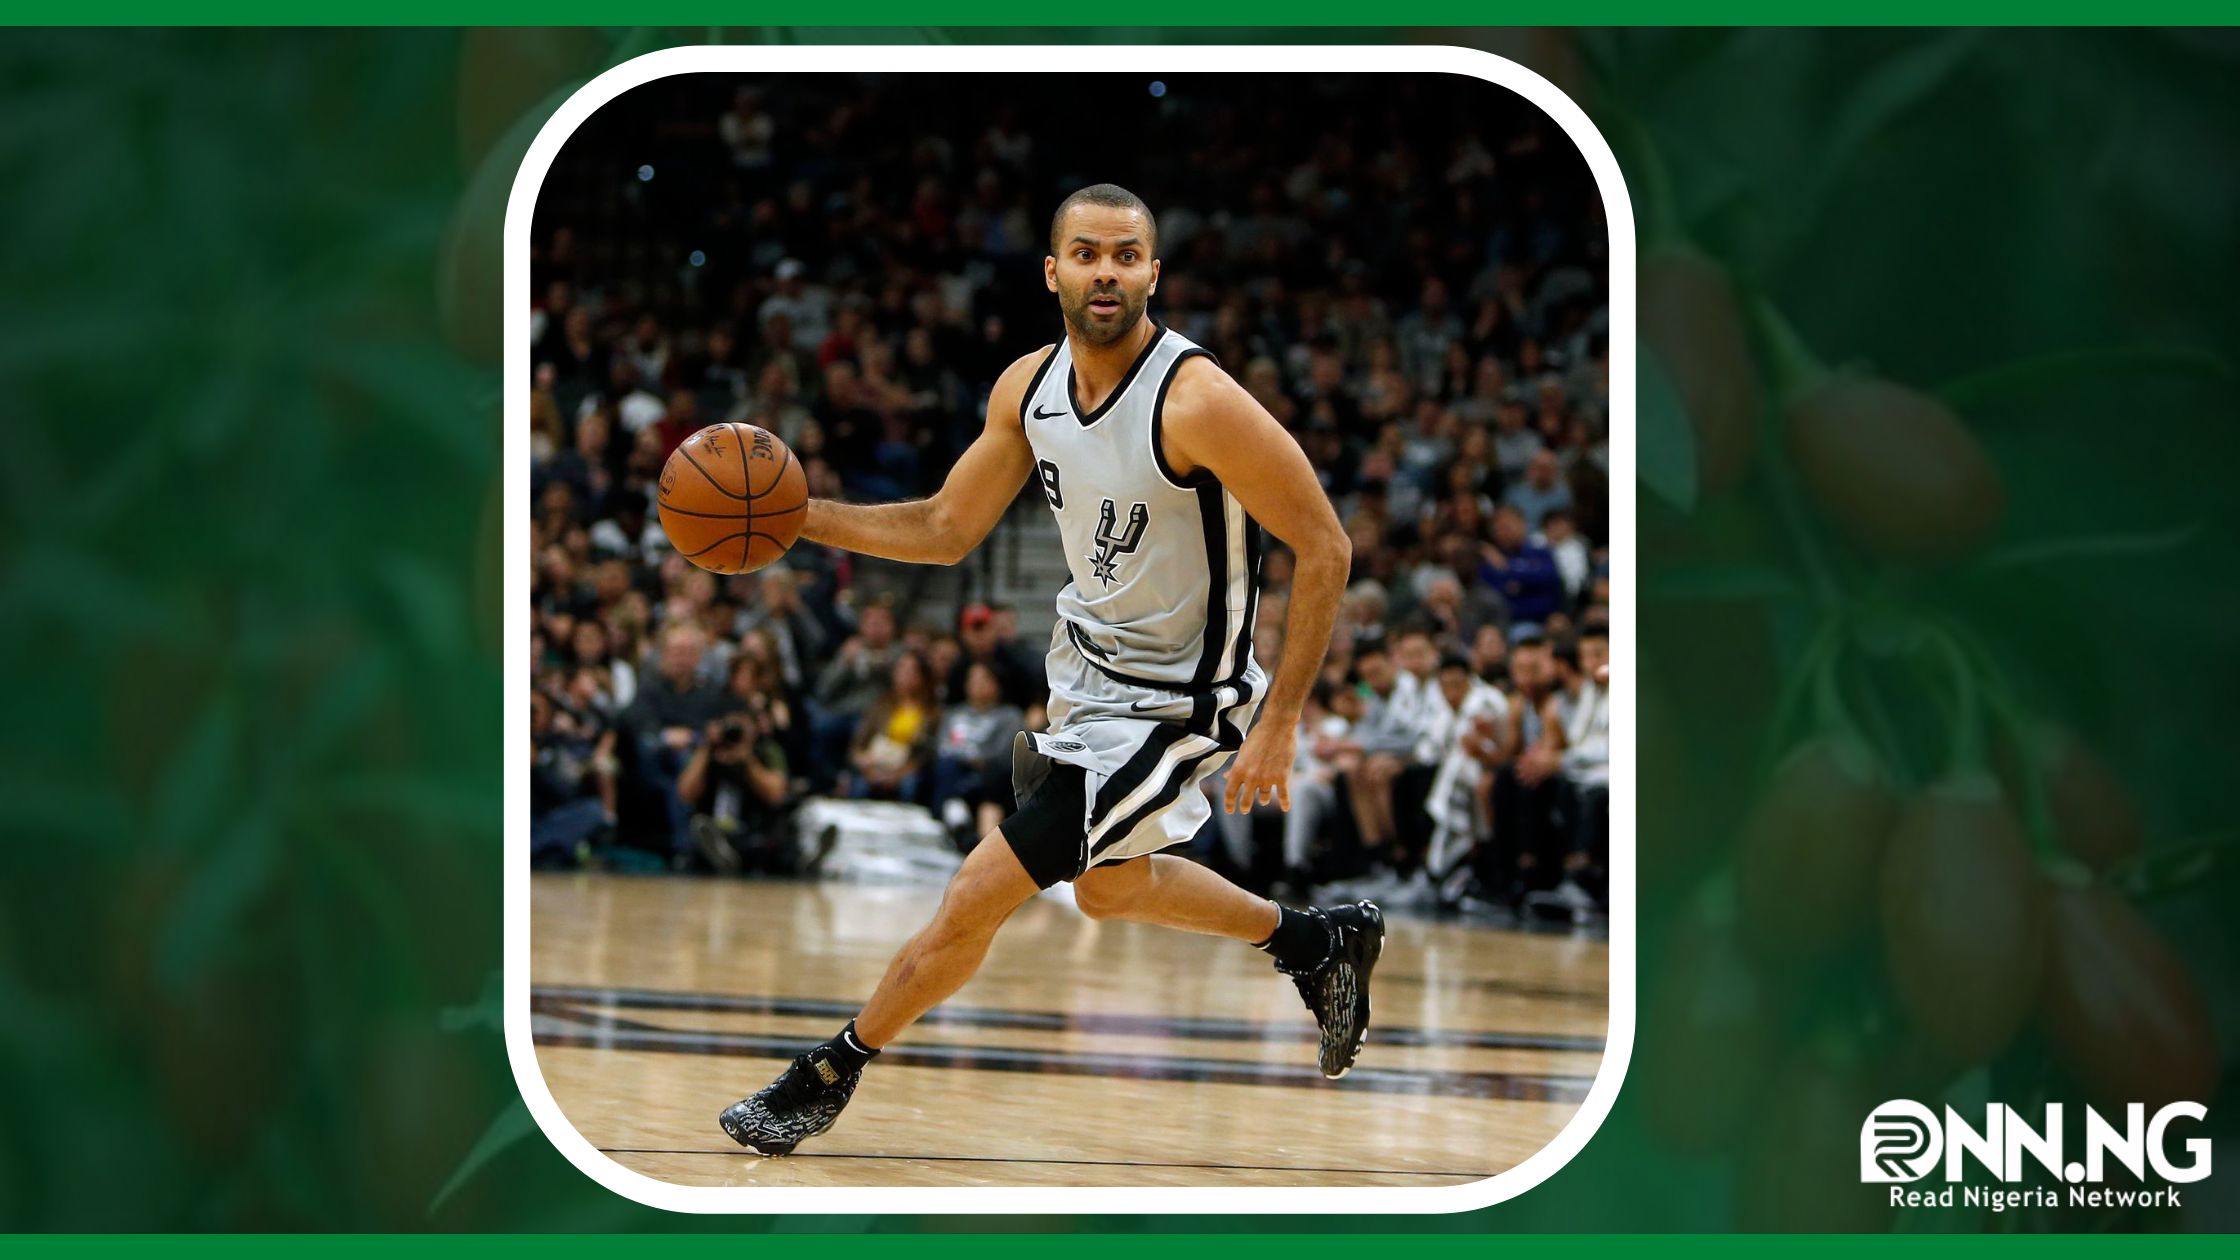 Tony Parker Biography And Net Worth